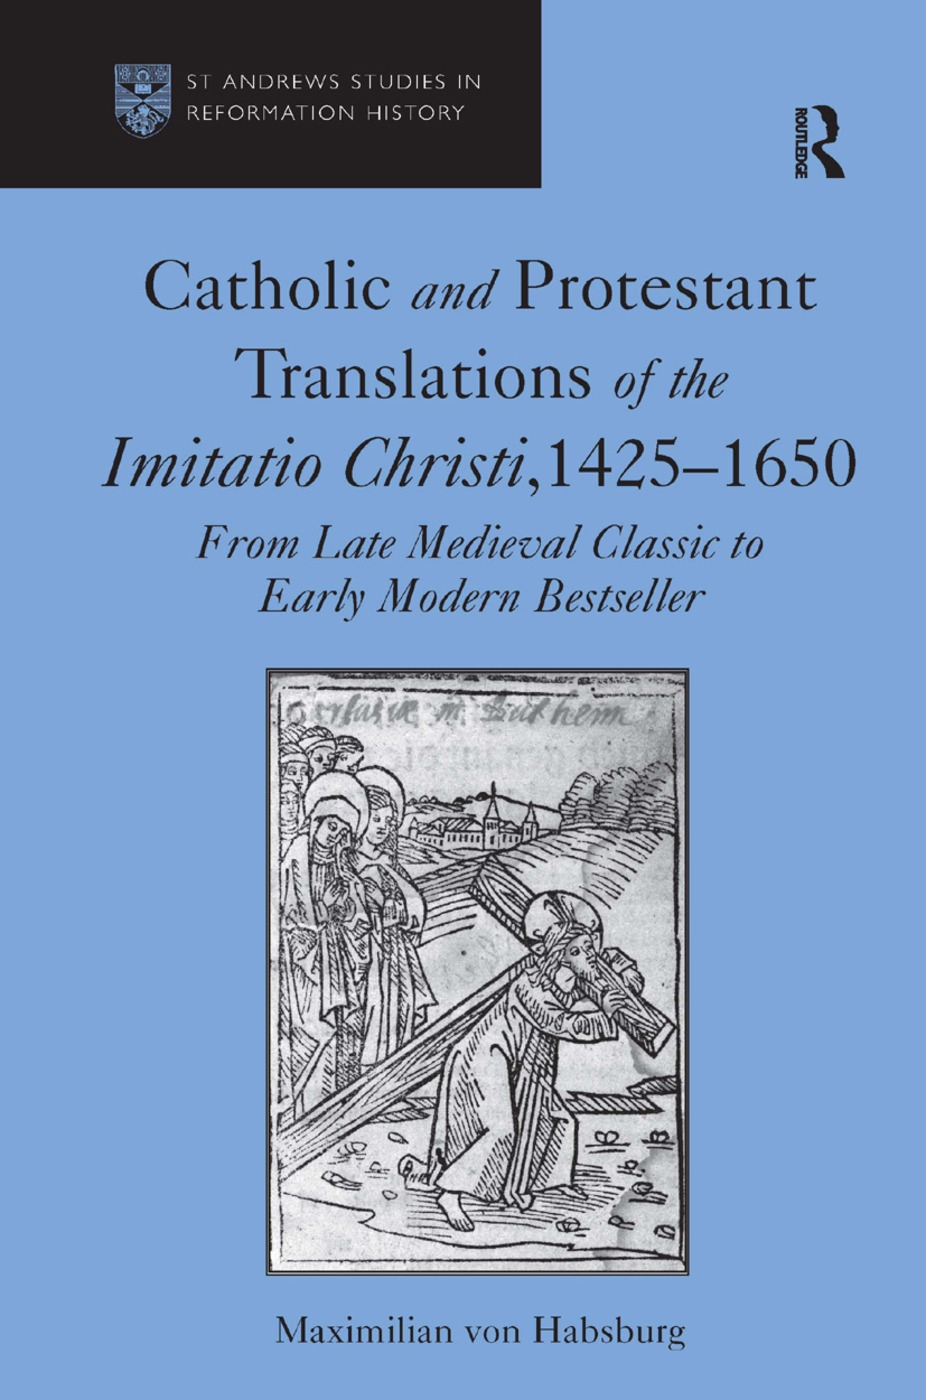 Catholic and Protestant Translations of the Imitatio Christi, 1425 1650: From Late Medieval Classic to Early Modern Bestseller